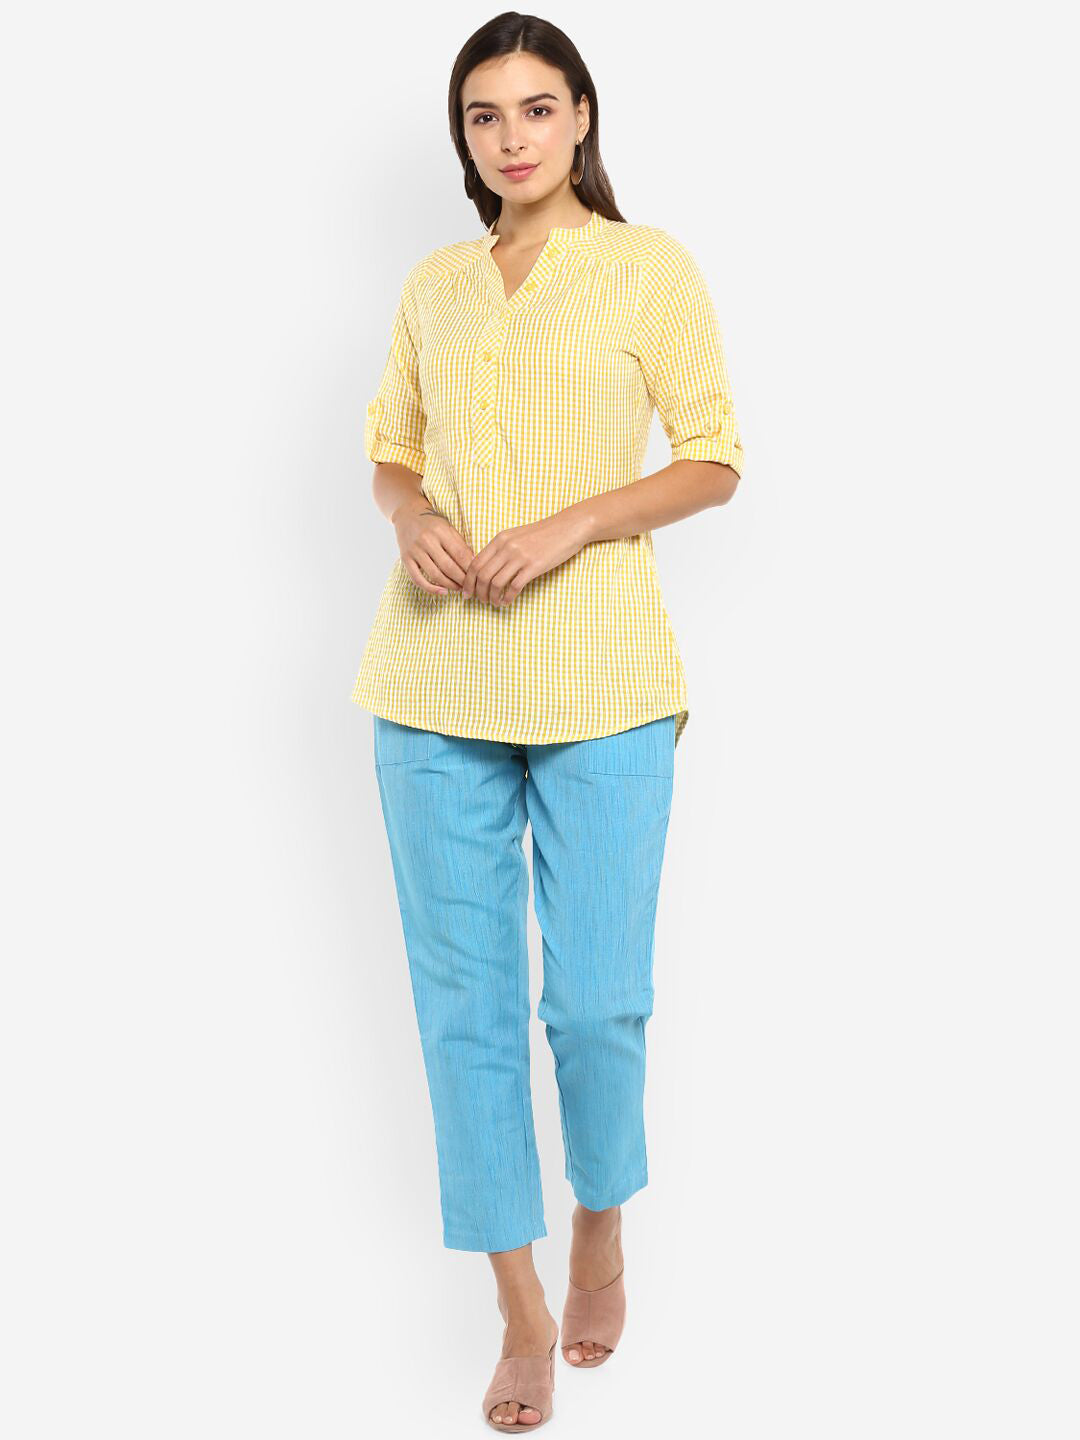 Chinos Narrow Trousers - Buy Chinos Narrow Trousers online in India